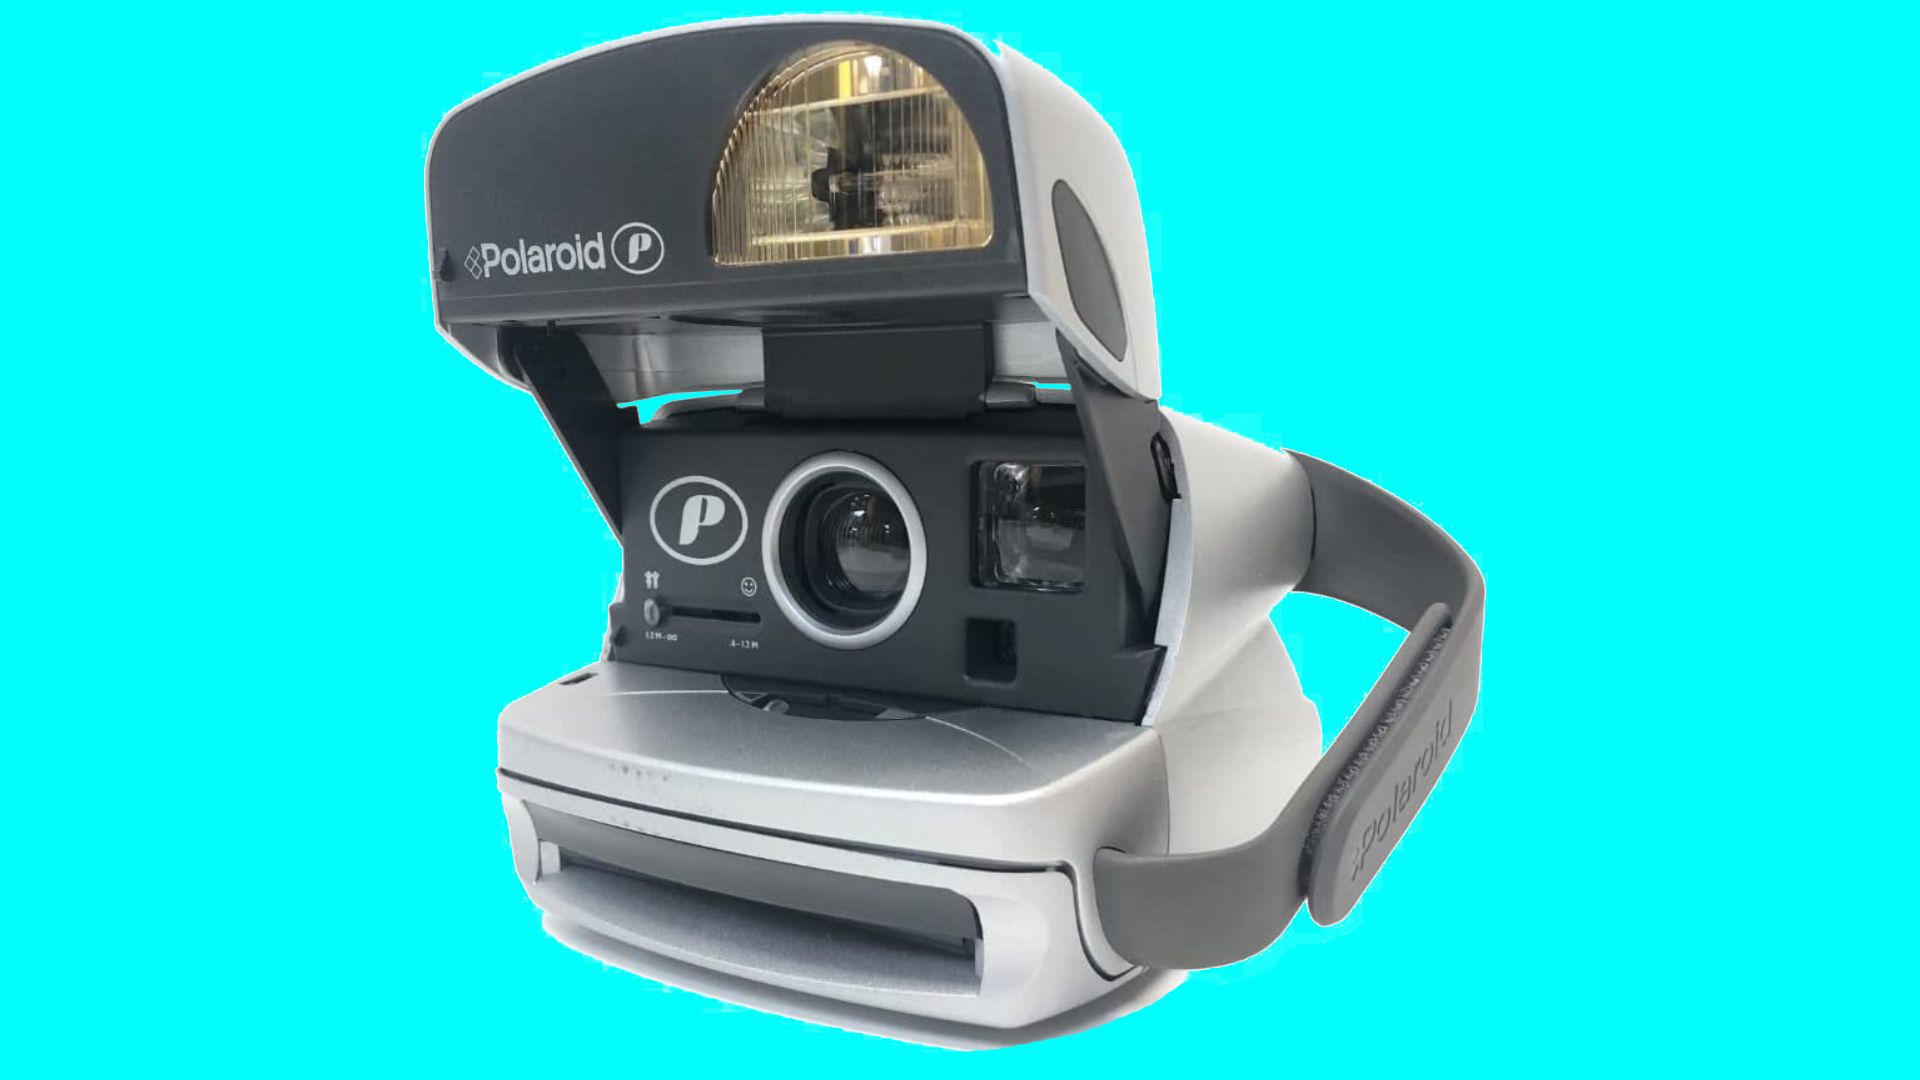 A Polaroid P600 instant camera on a light blue background